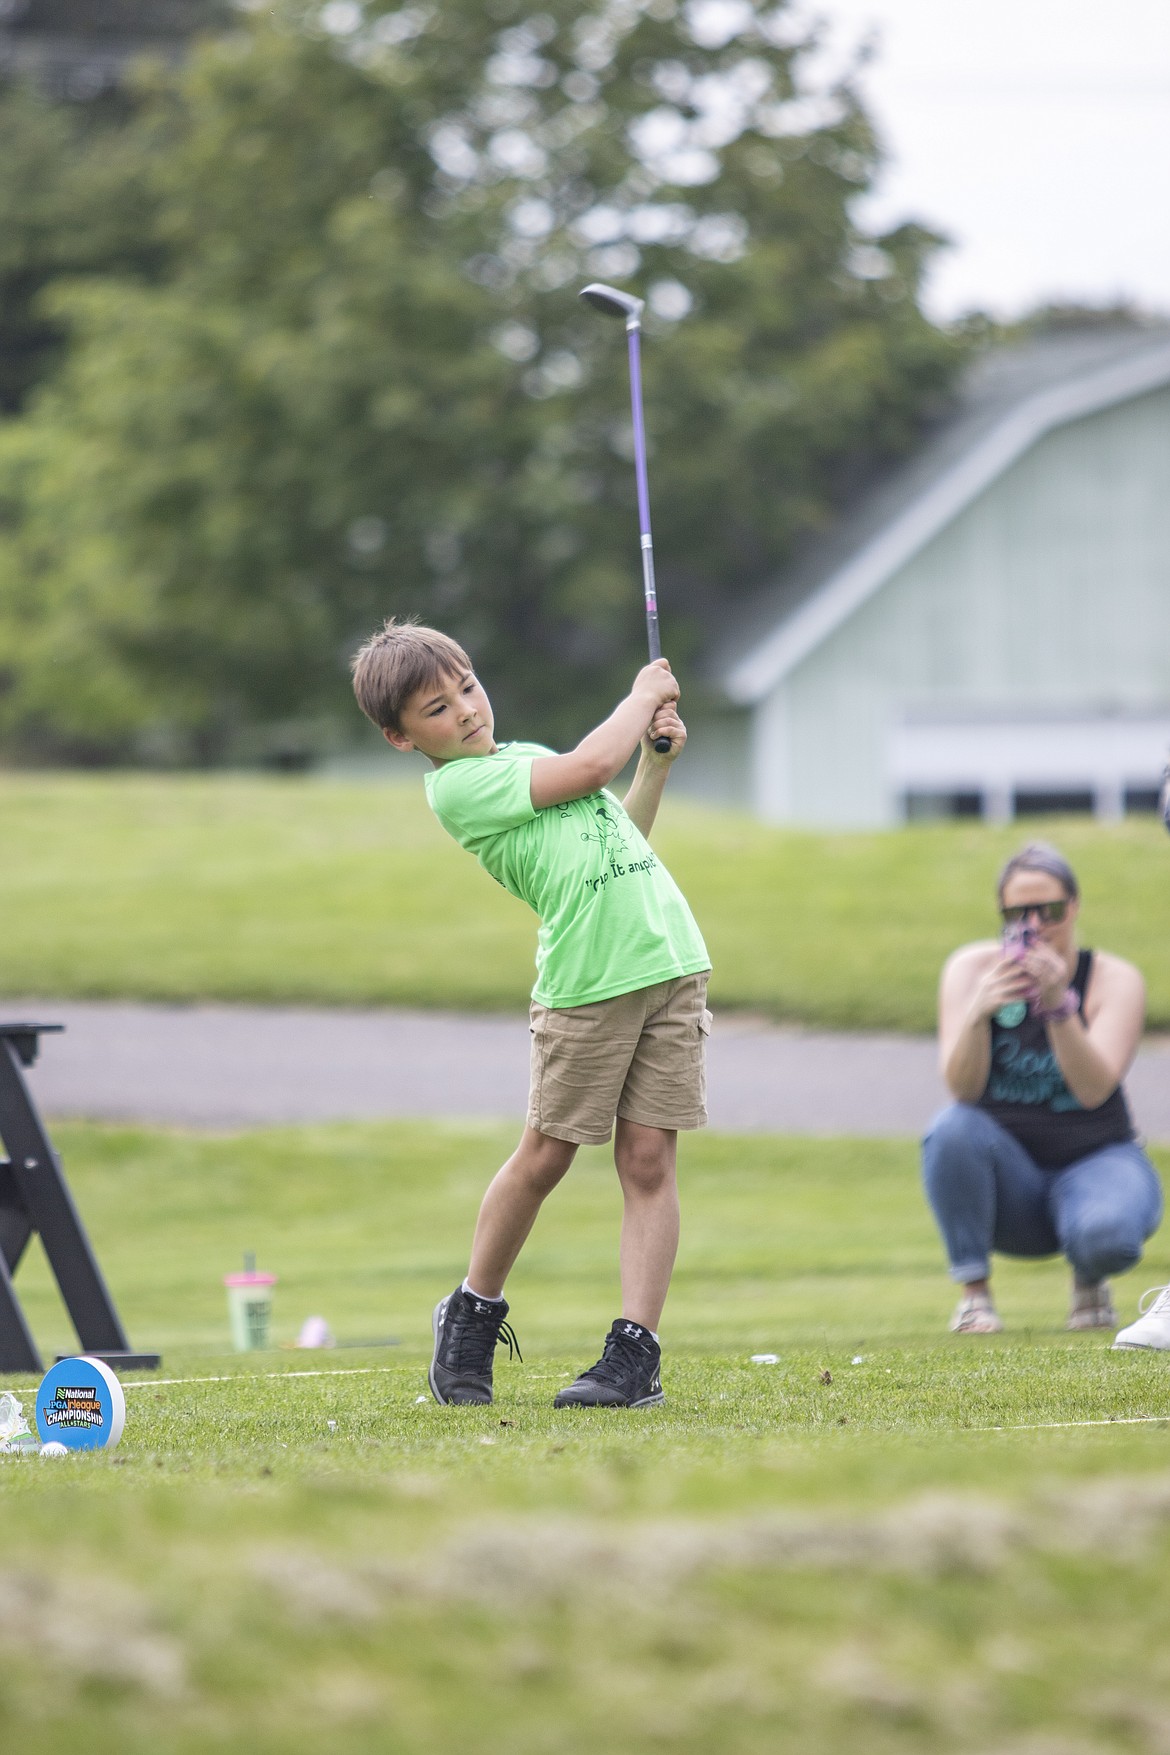 Noah Valentine takes a big swing during the Junior Camp Pitch, Putt, and Drive Competition held at the Polson Bay Golf Course on Friday.